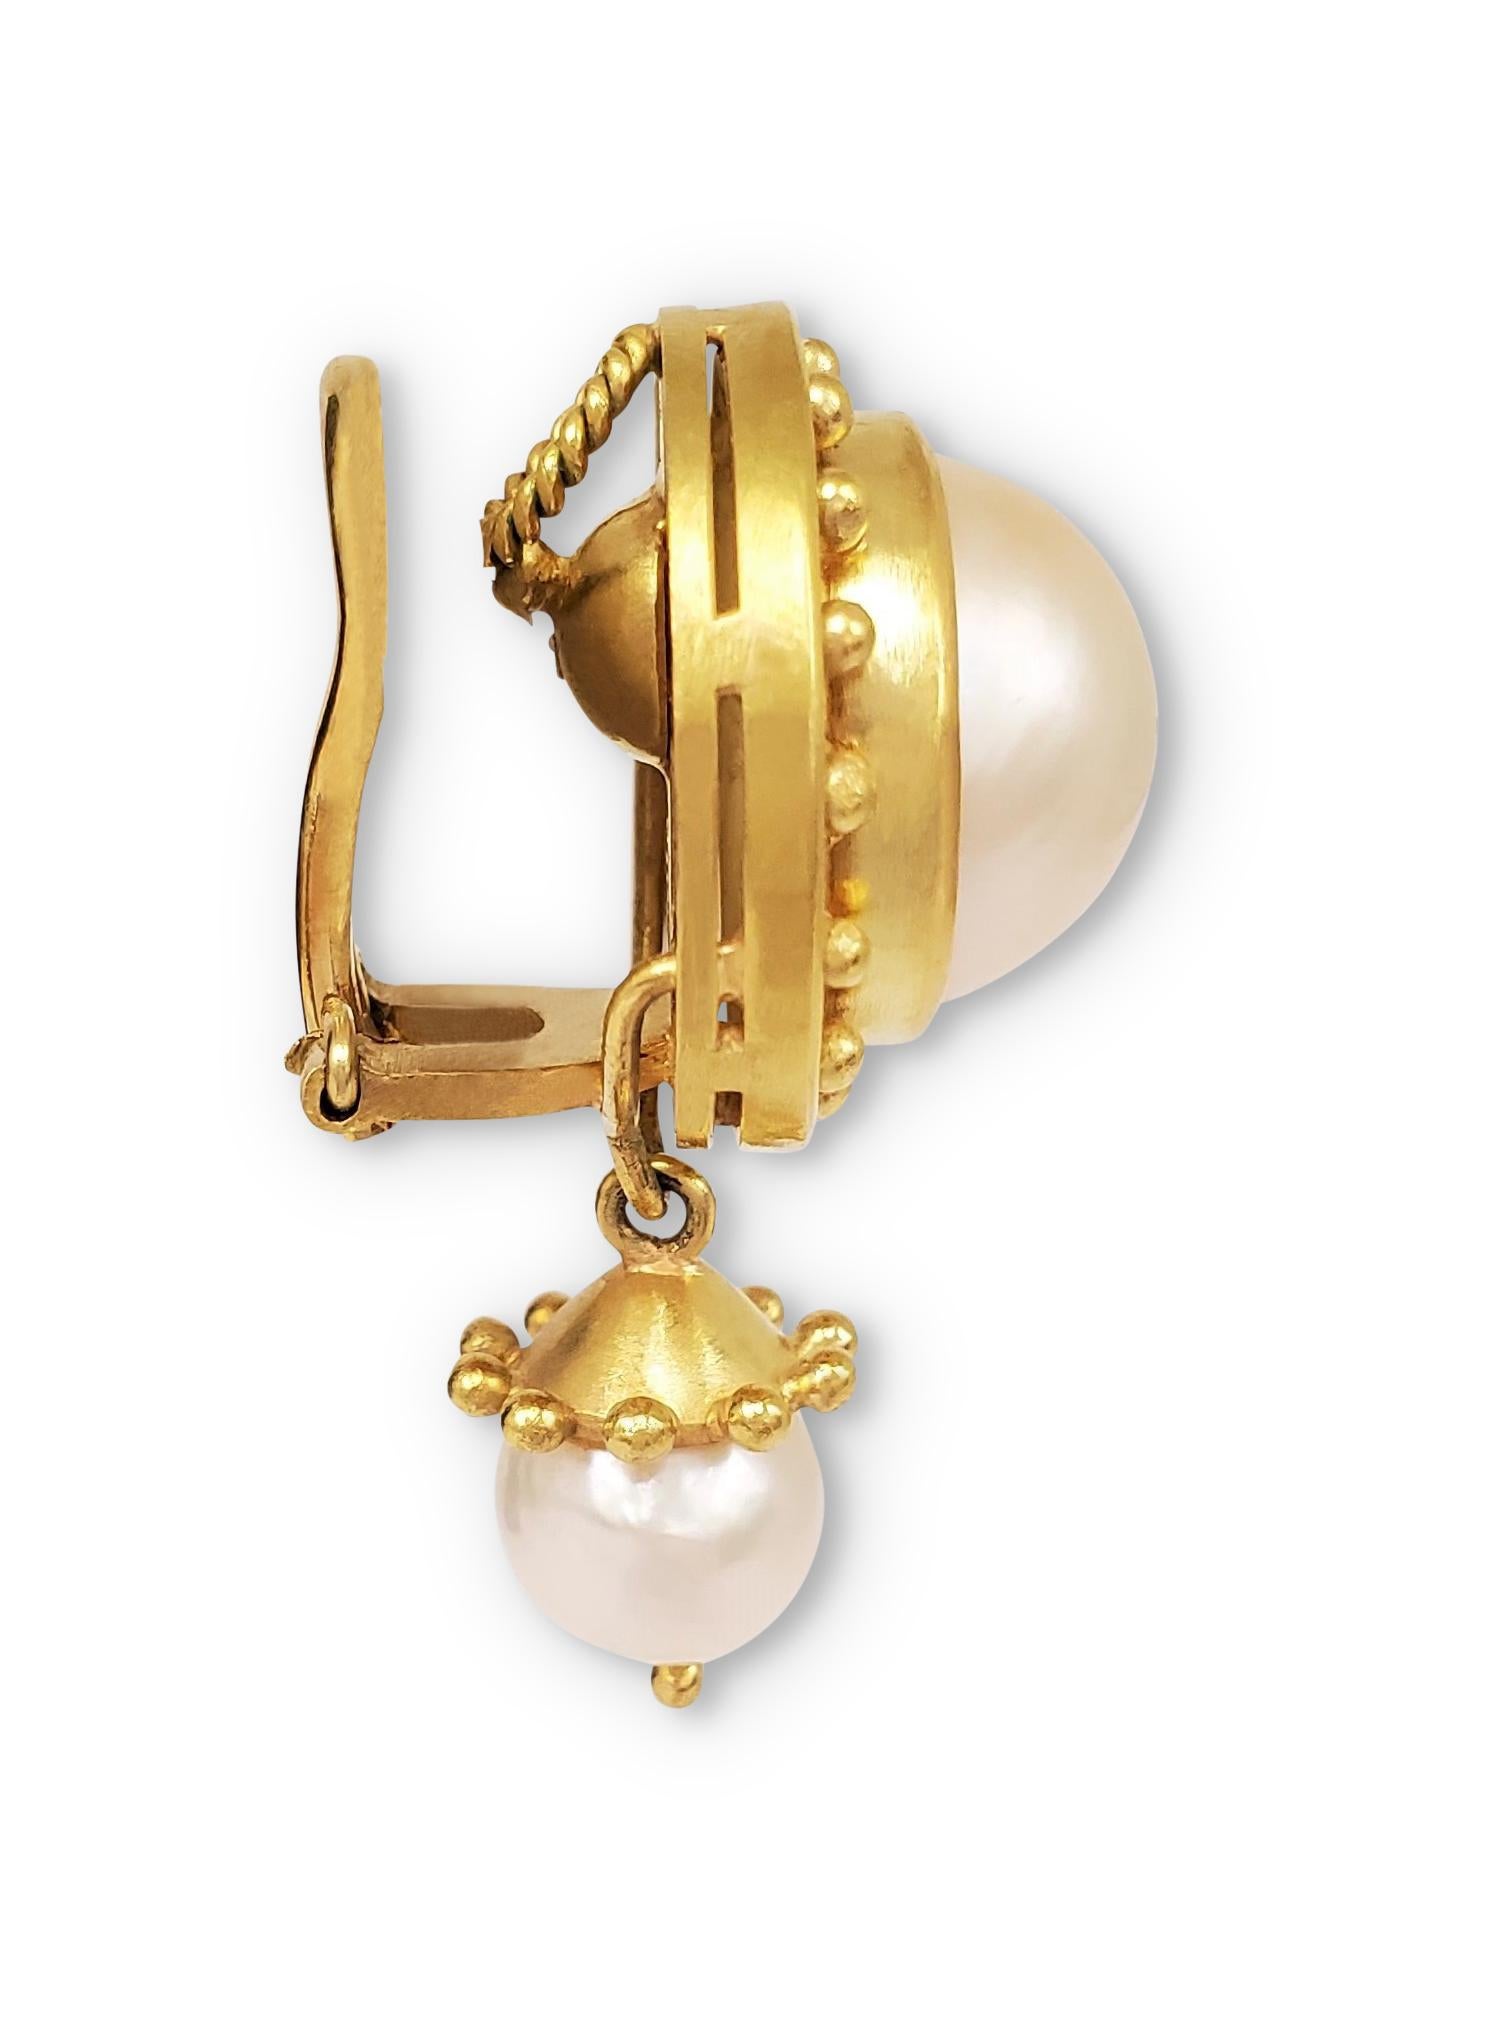 Authentic Elizabeth Locke ear clips crafted in 18 karat yellow gold.  Each clip-on earring centers on a 12mm pearl surrounded by a beaded gold bezel and featuring a 7mm pearl suspended from an 18 karat yellow gold cap.  Signed E, 18K.  CIRCA 2010s